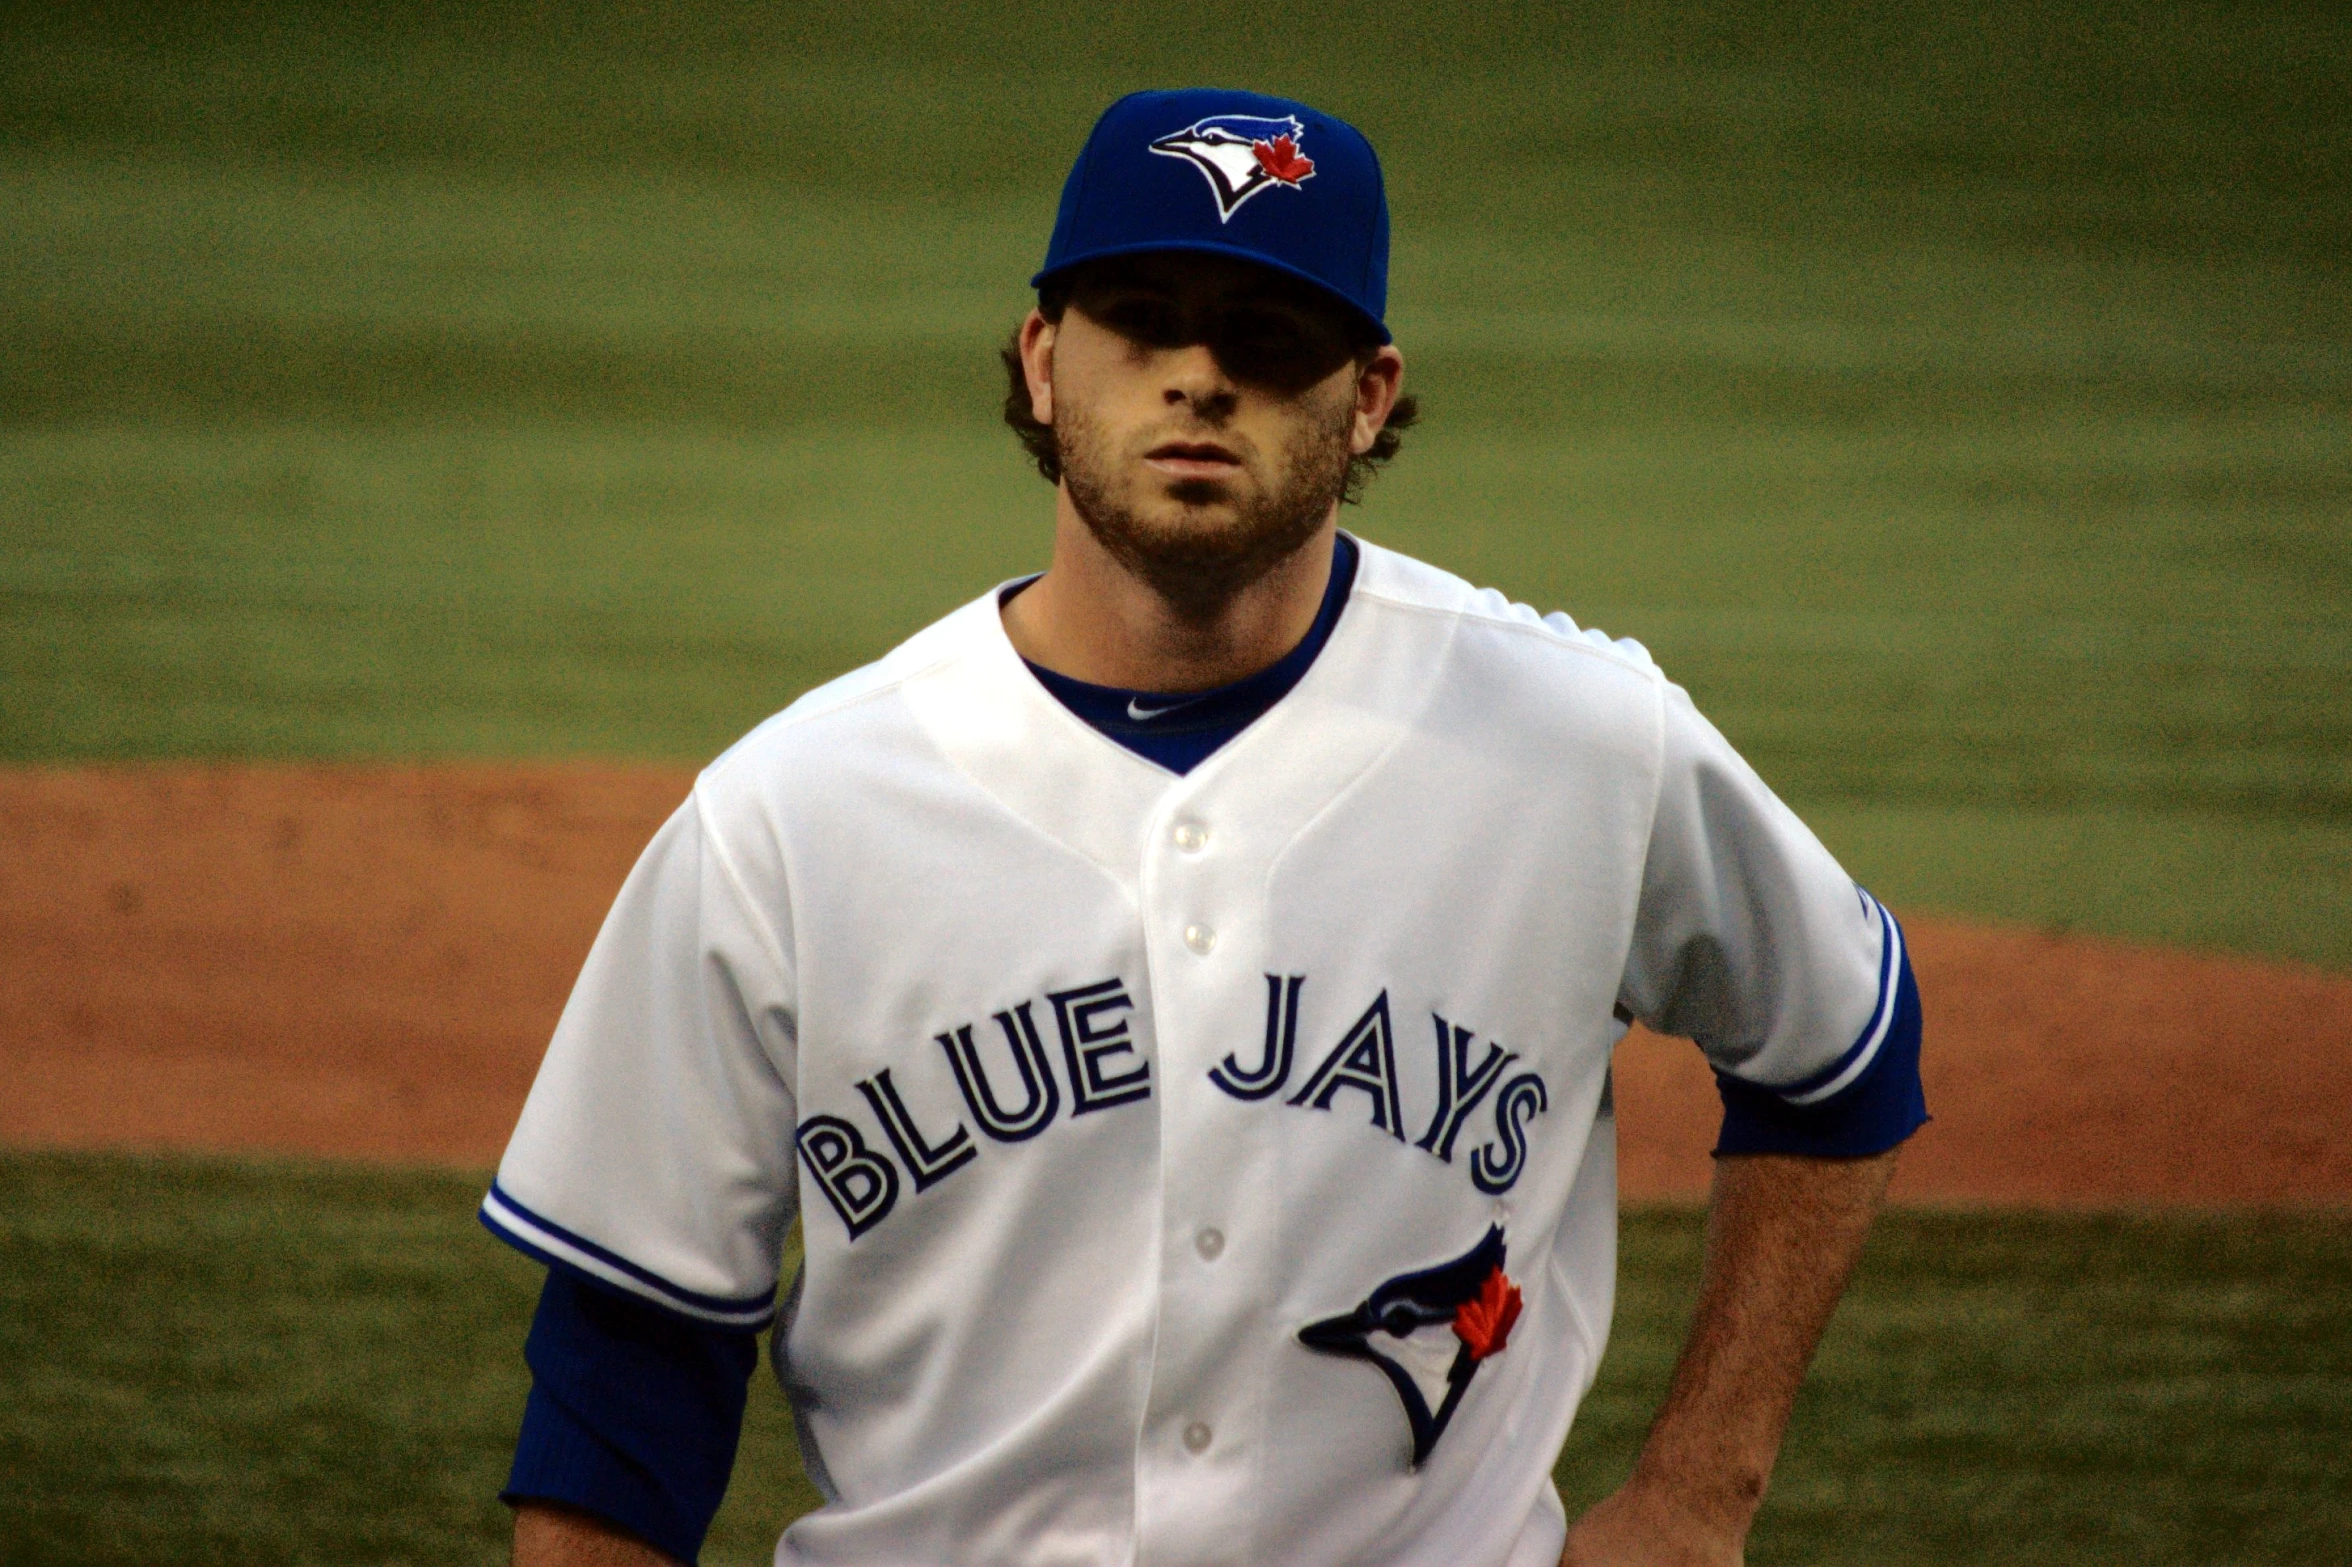 a man in white and blue baseball uniform standing by a baseball field